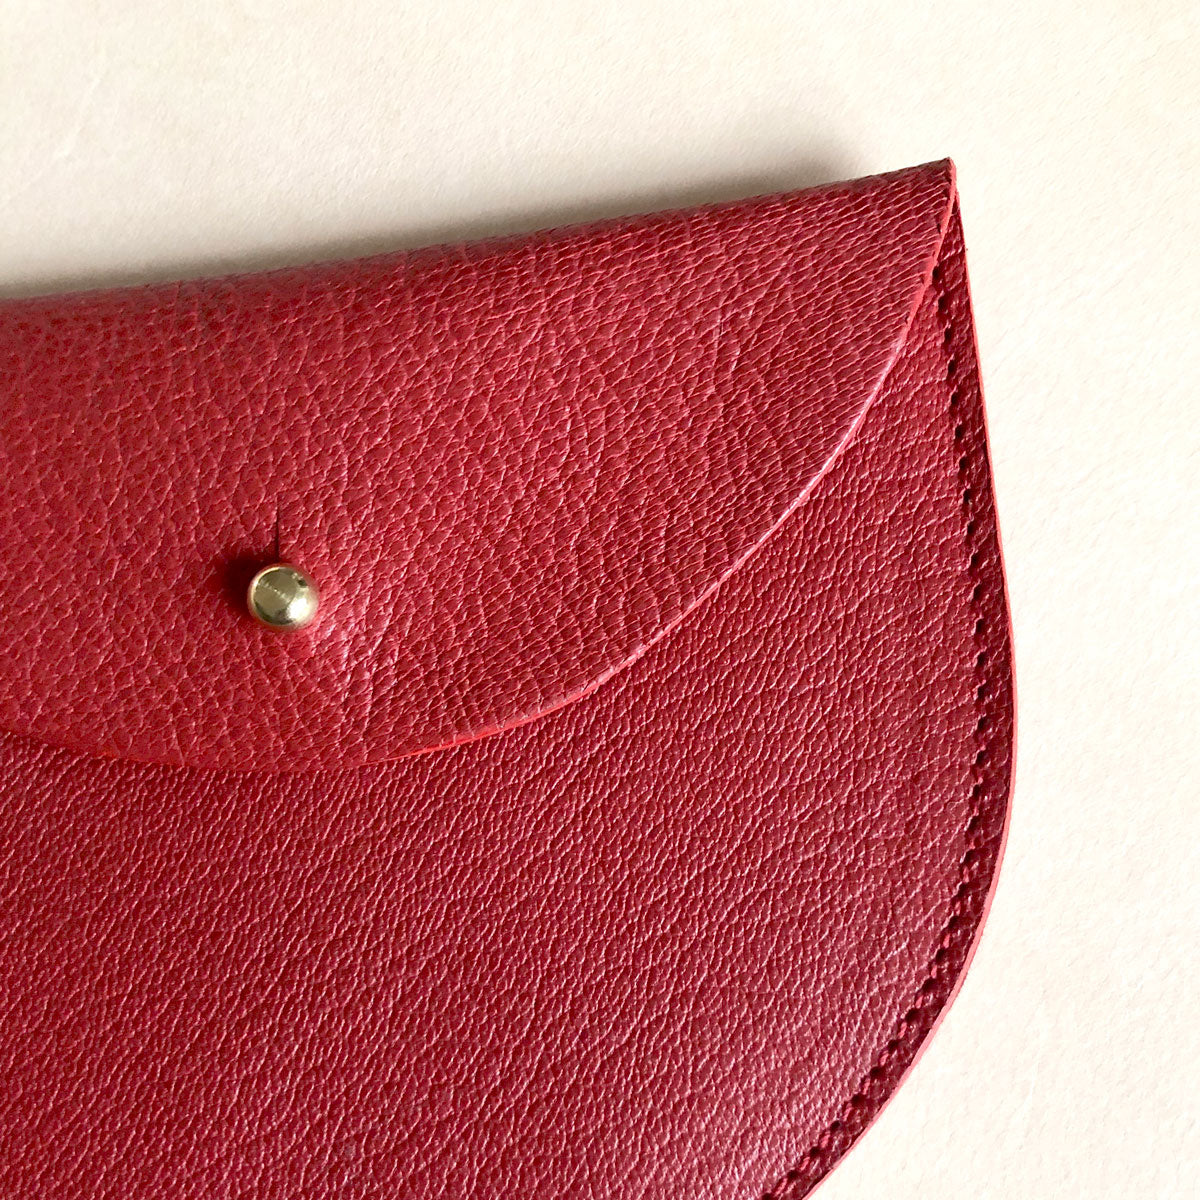 Handmade leather purse - Red